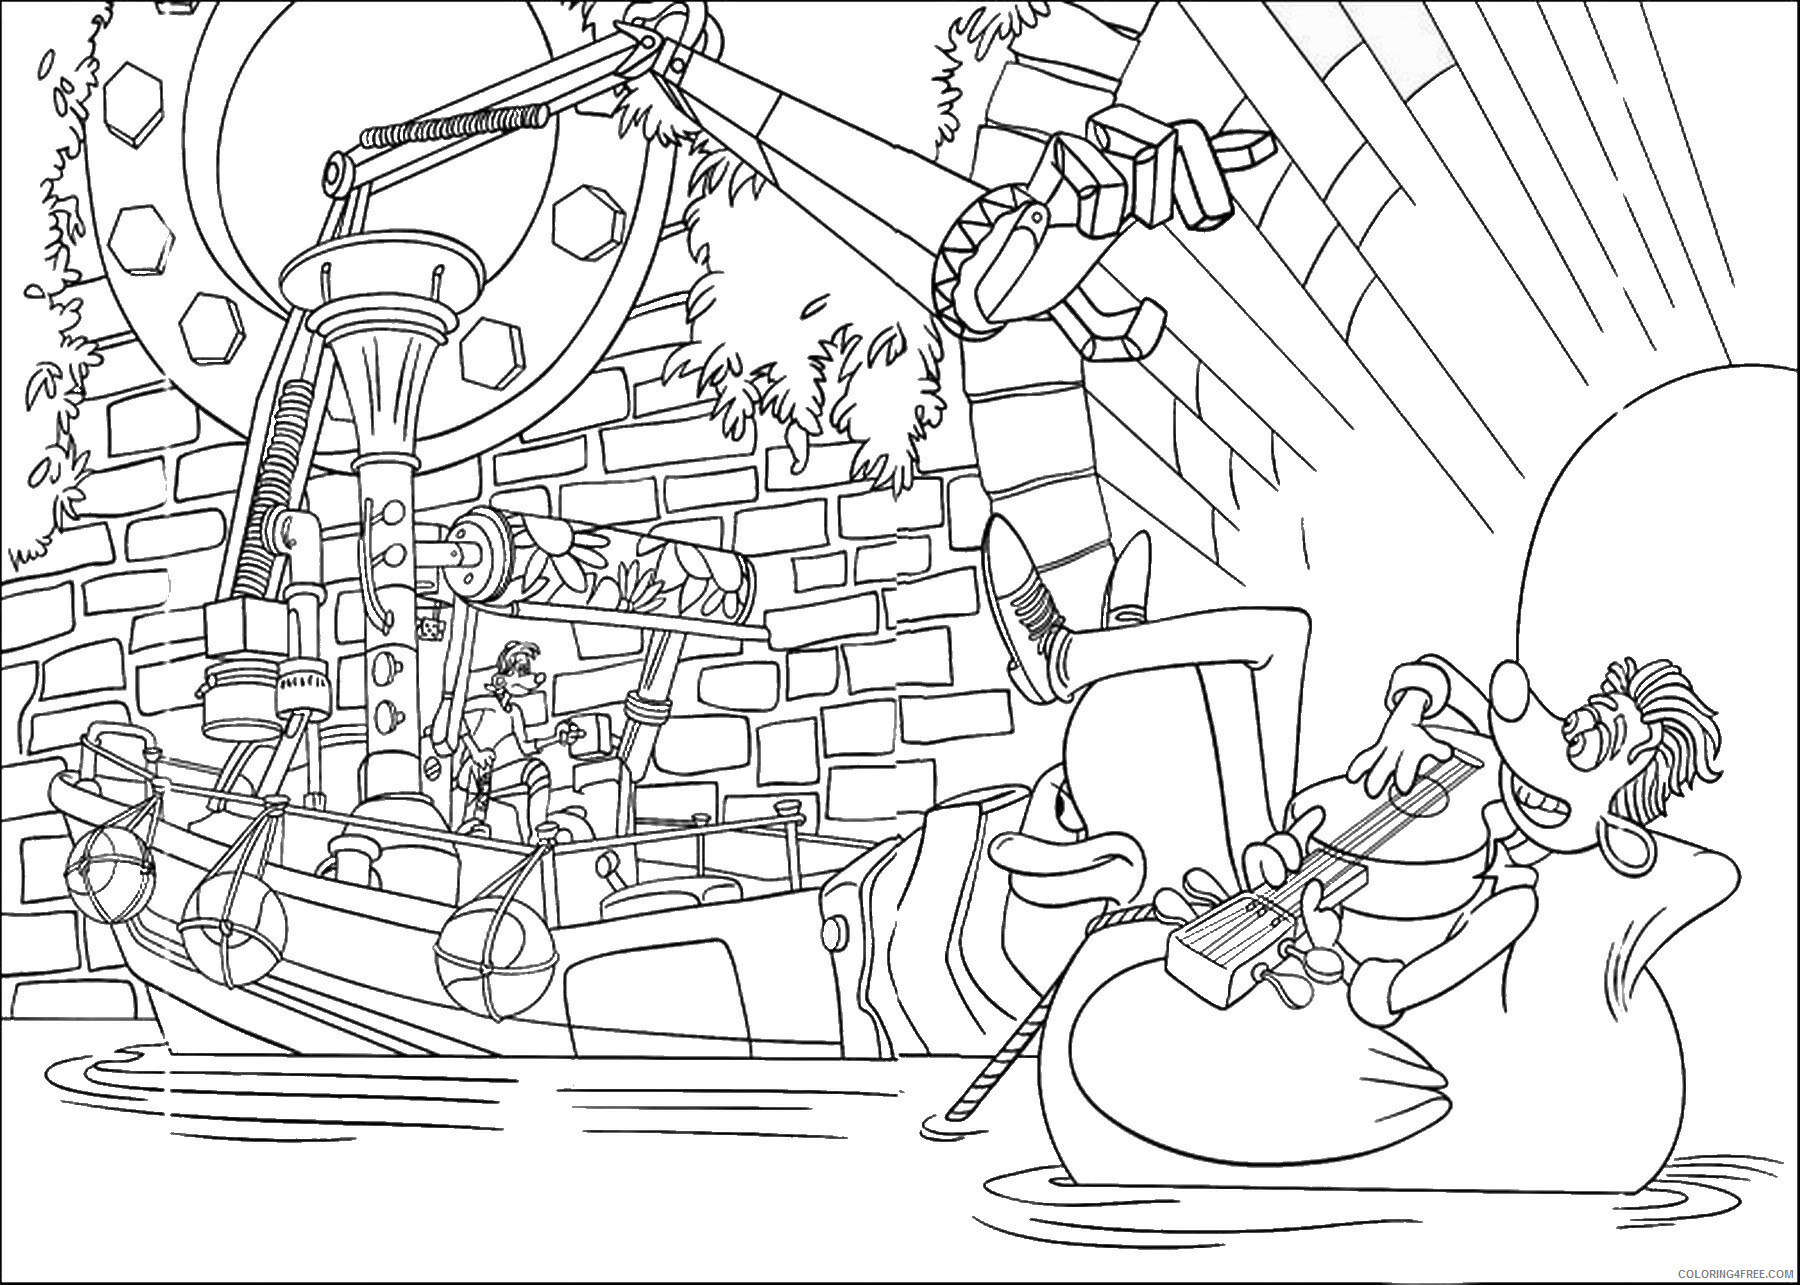 Flushed Away Coloring Pages TV Film flushed_cl_11 Printable 2020 02970 Coloring4free